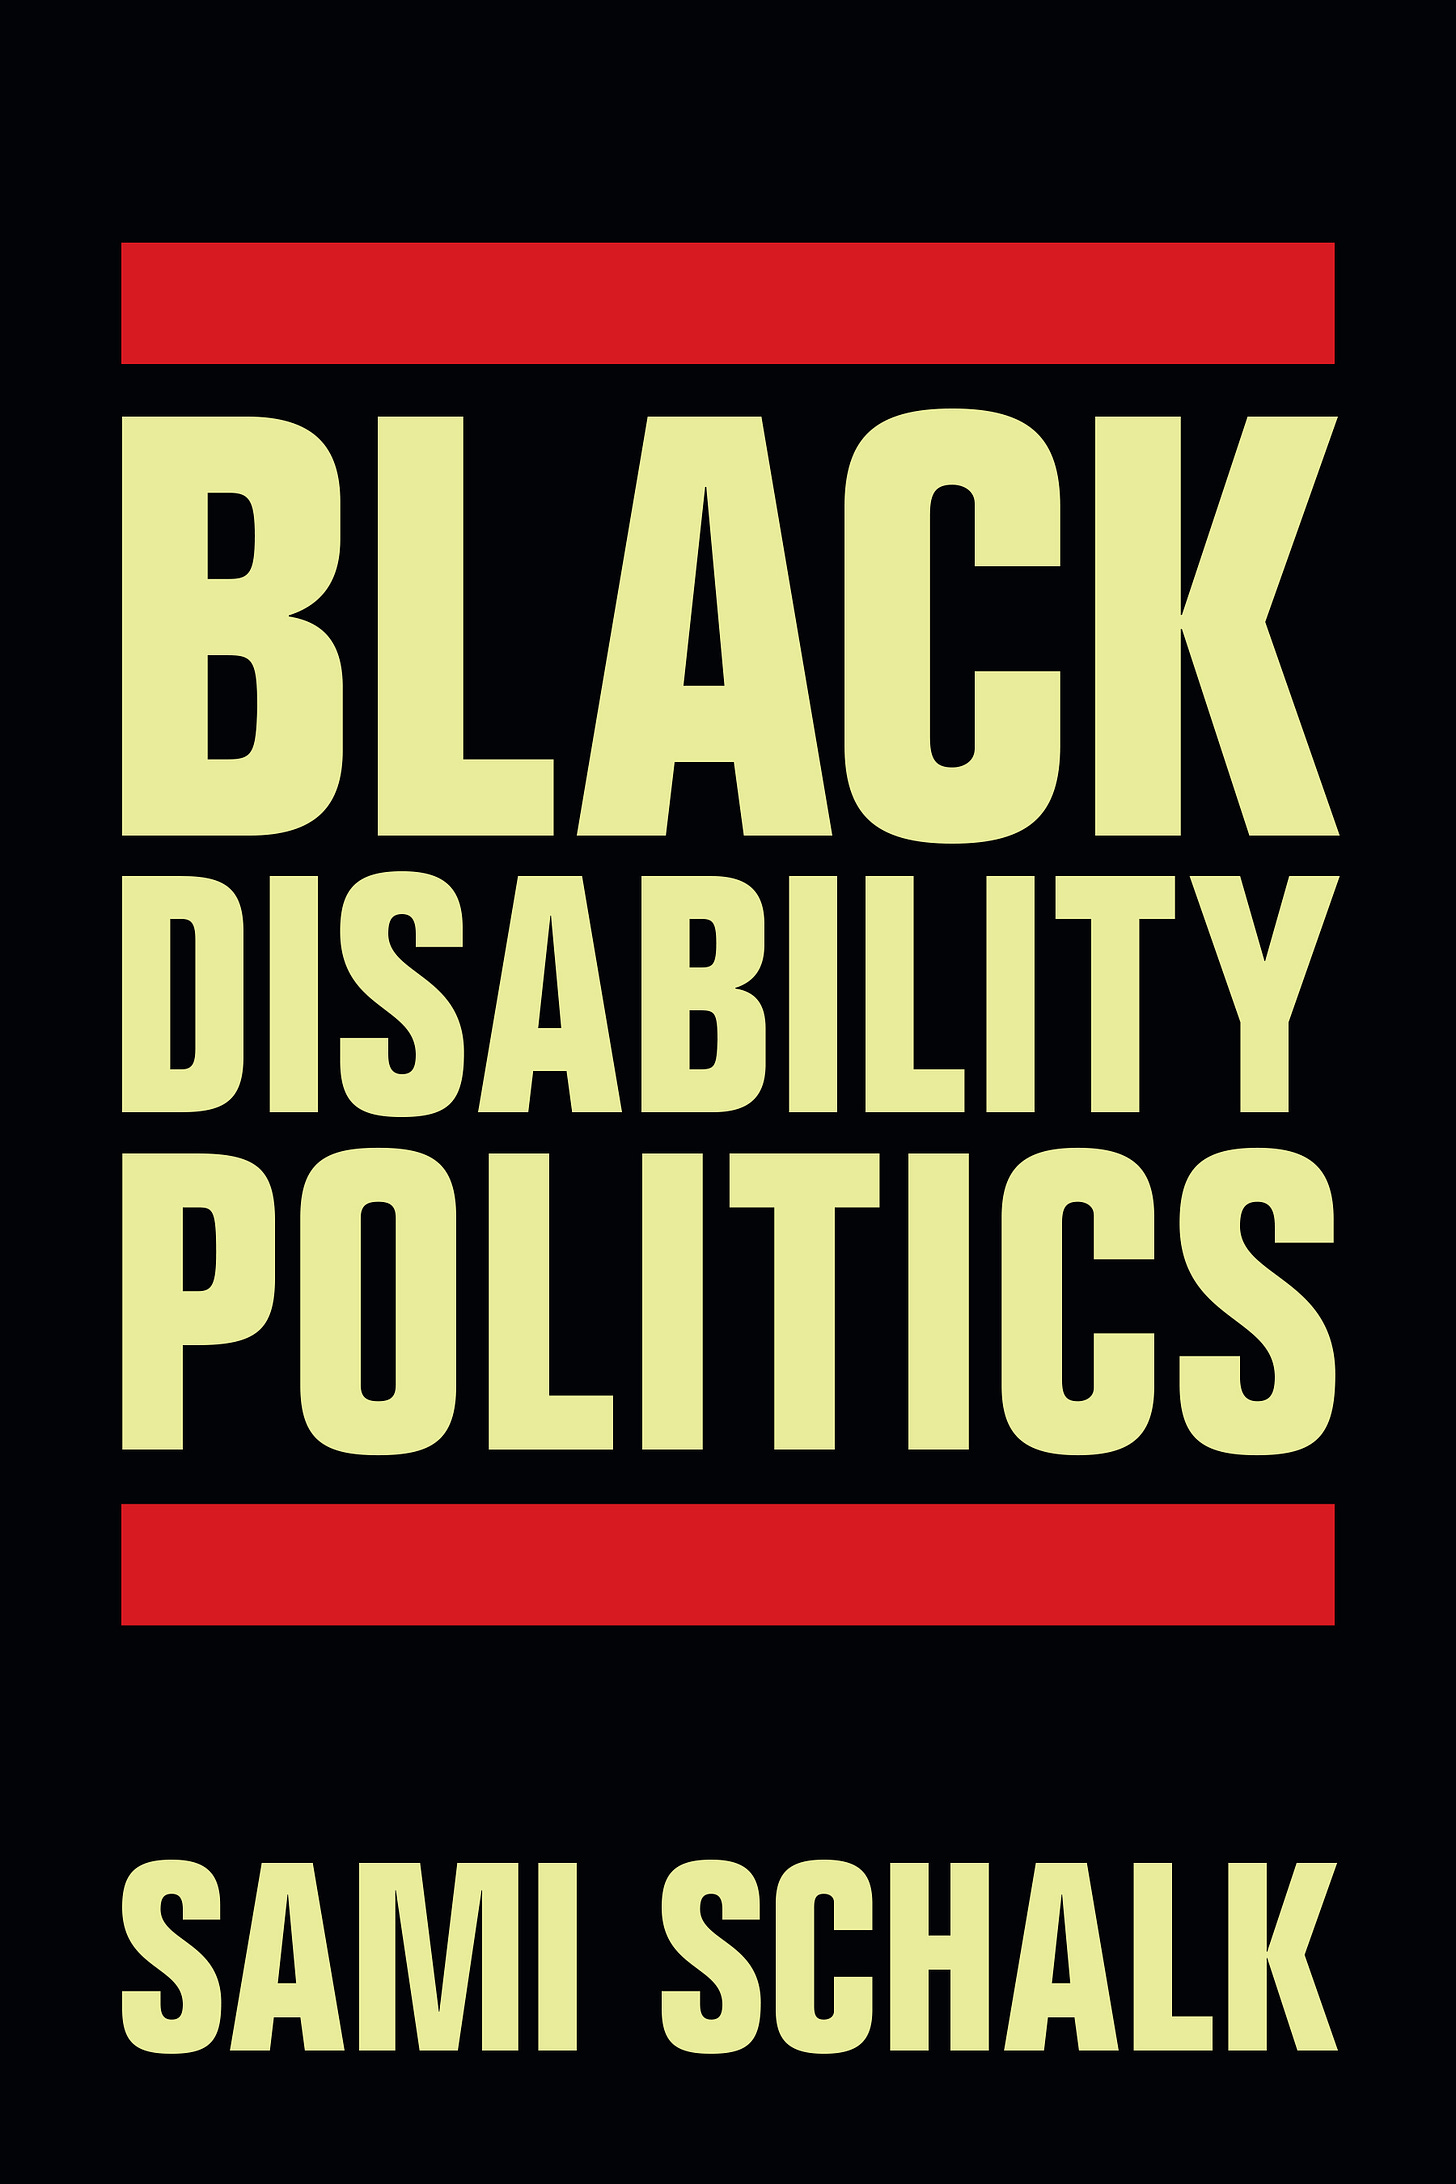 Cover of Black Disability Politics by Sami Schalk. Cover features the title in pale yellow all-caps font bordered by two red lines against a black background.